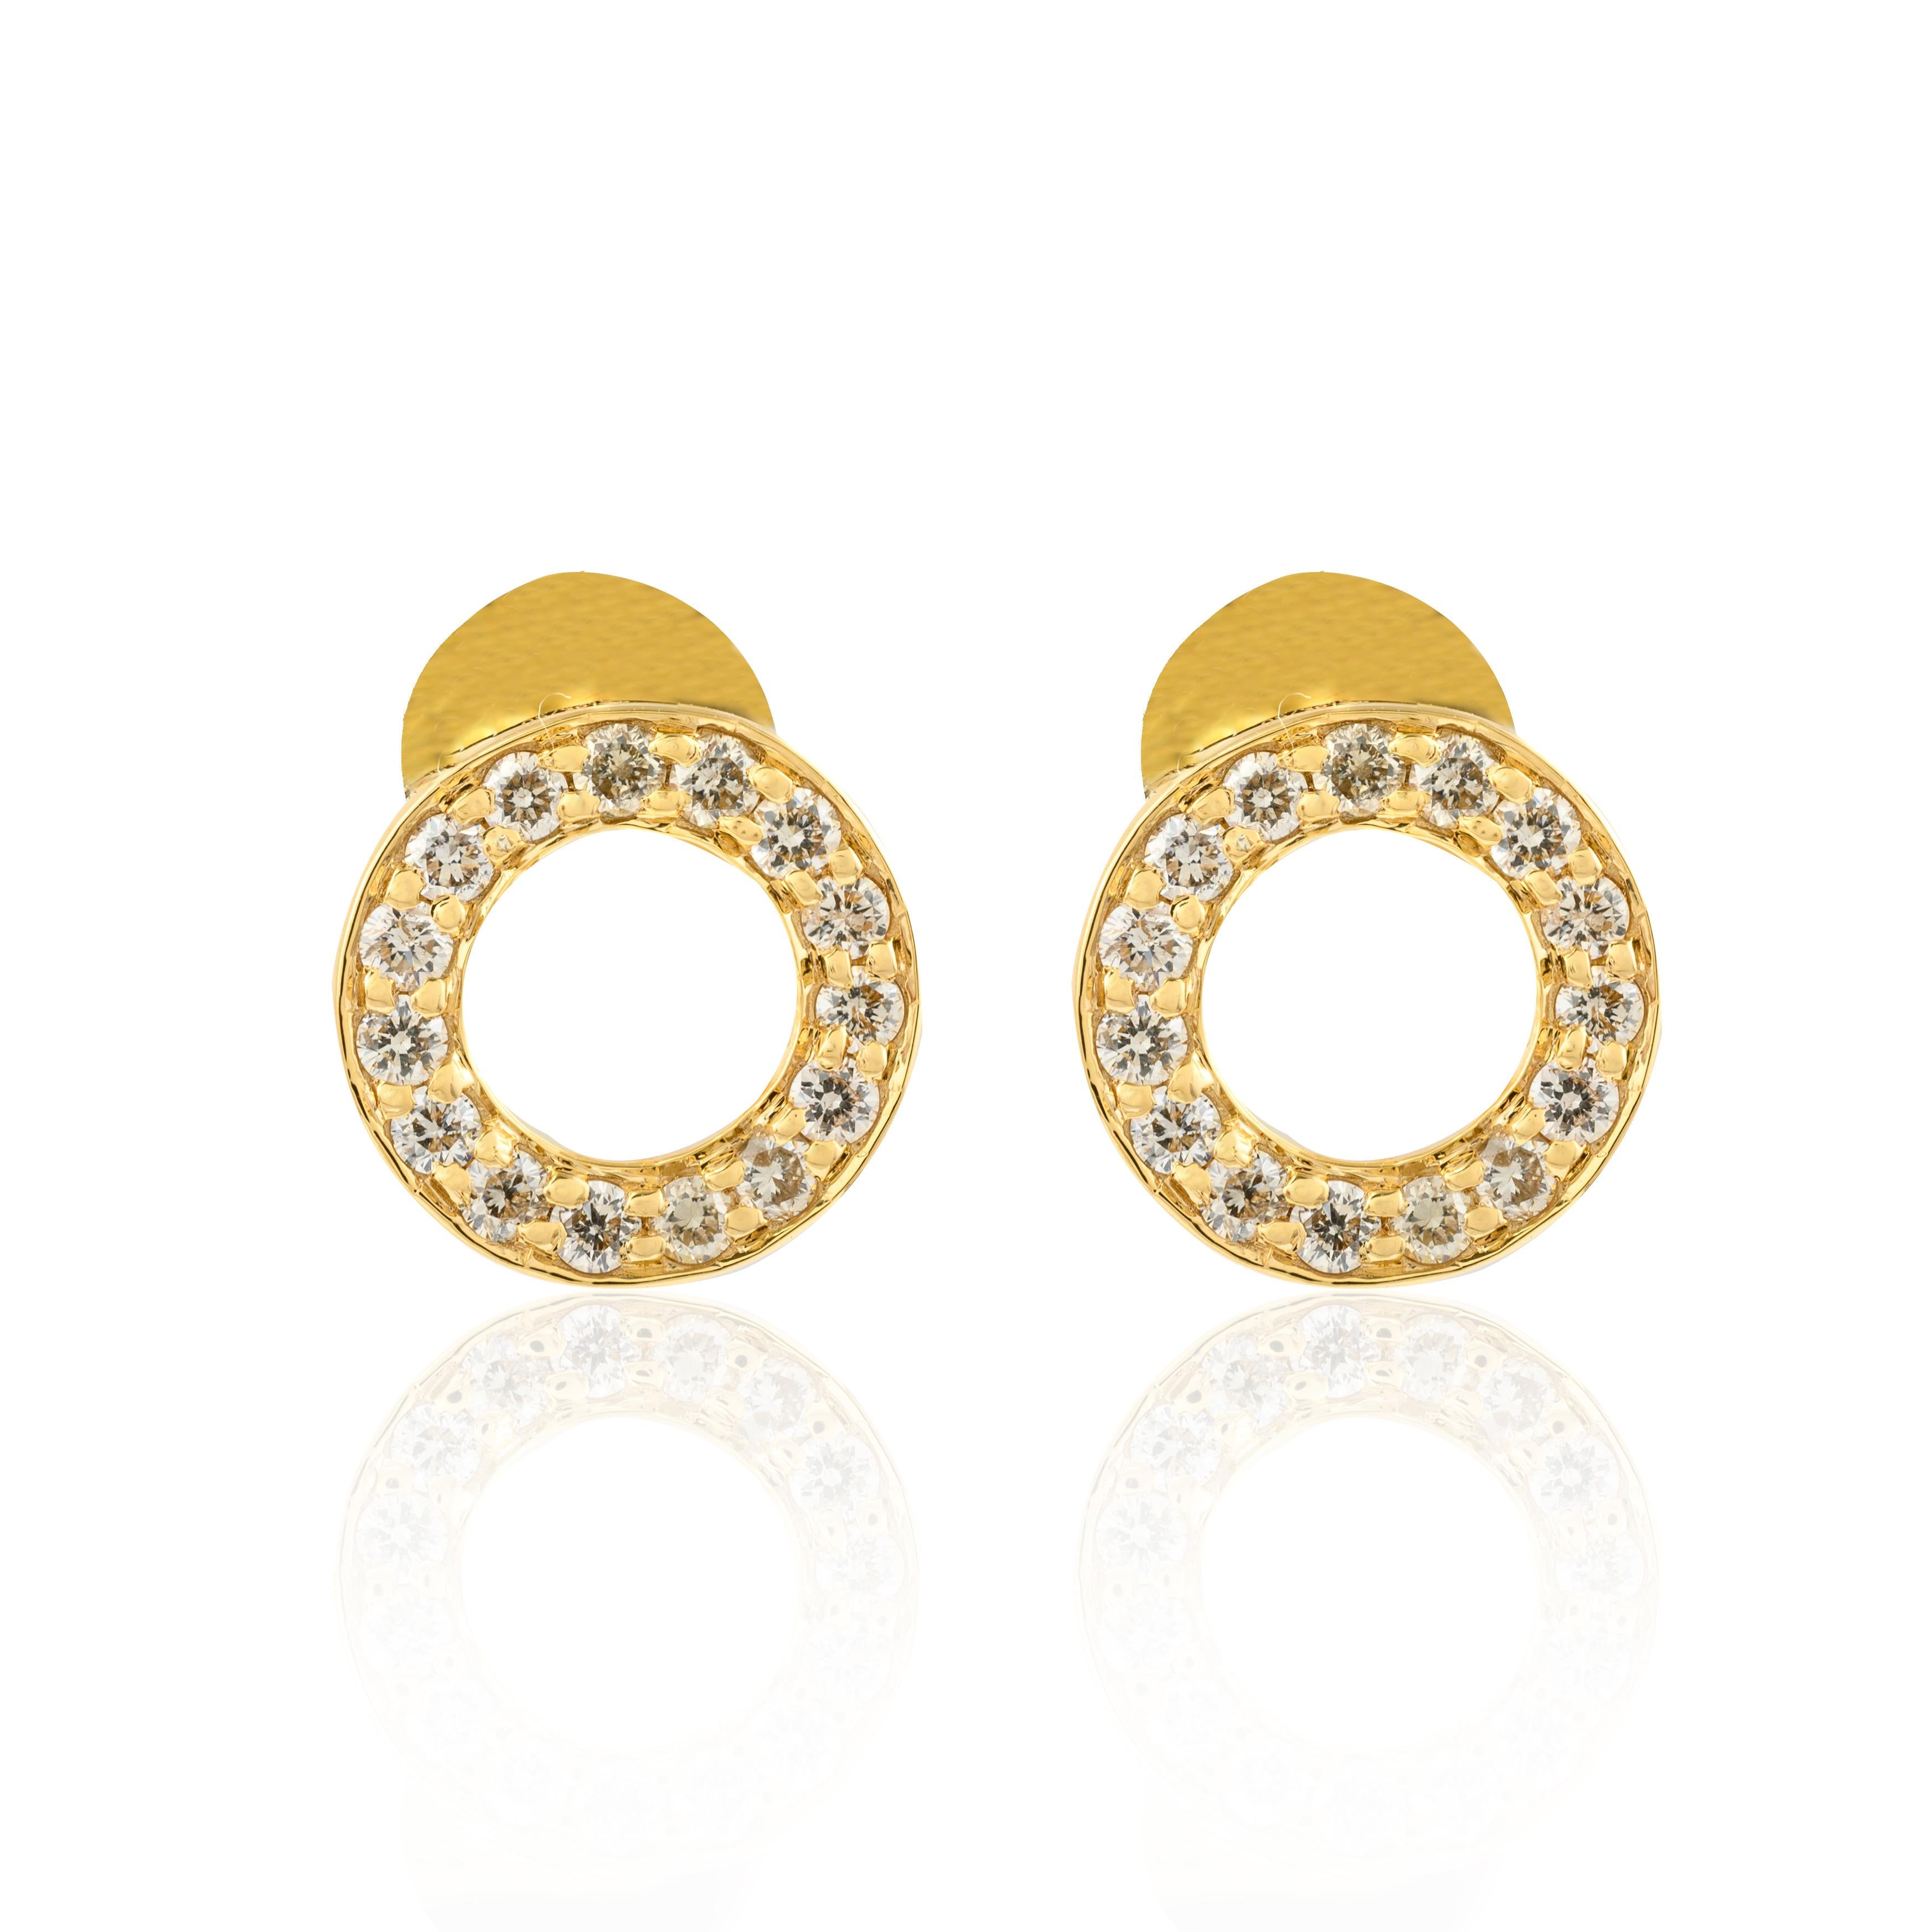 Modern Minimalist Diamond Circle Stud Earrings Gift For Her in 18k Solid Yellow Gold For Sale